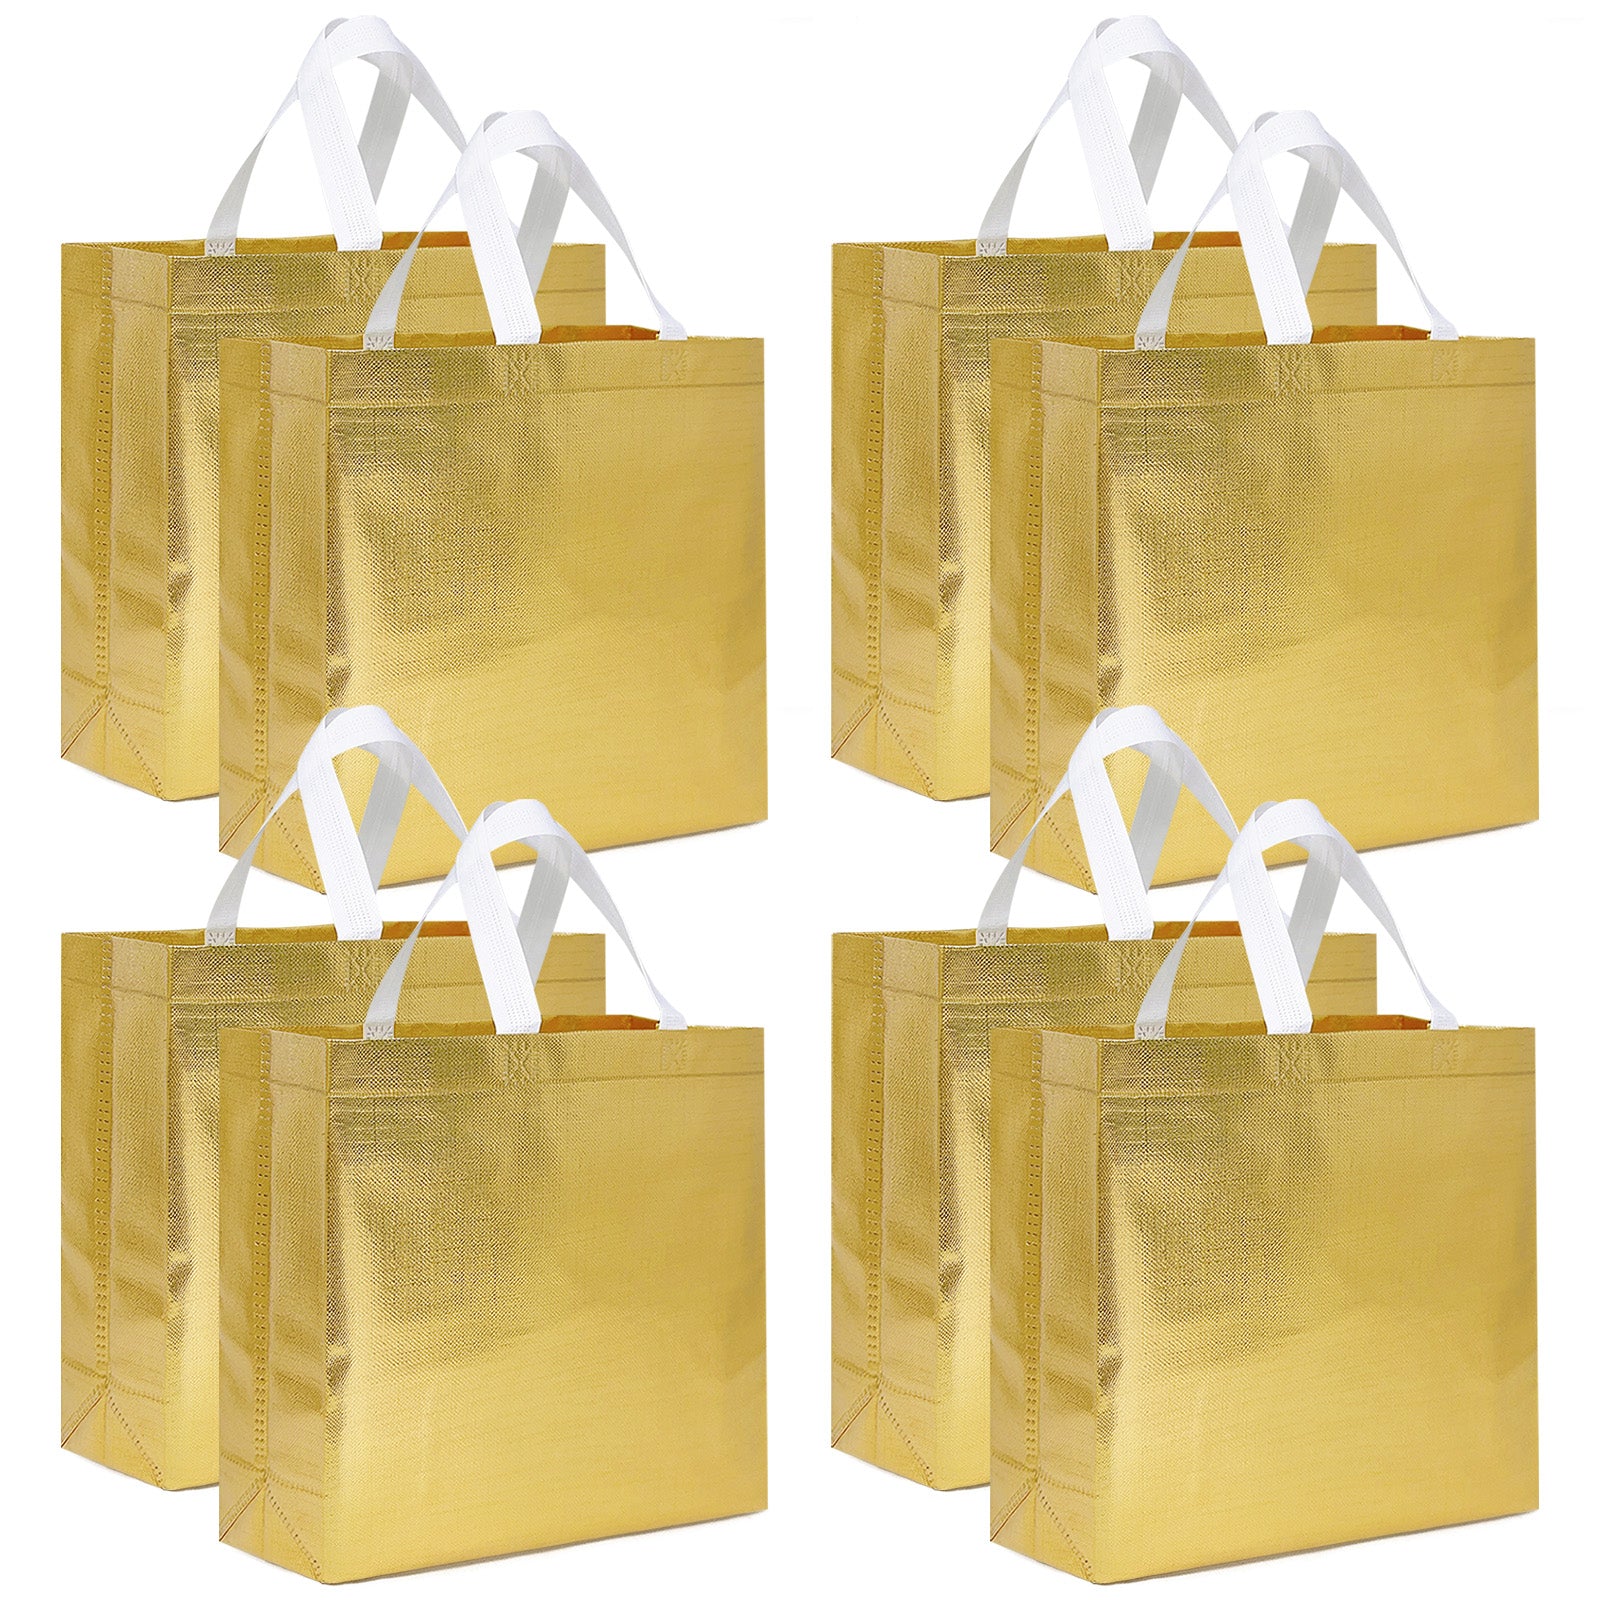 Wrapables Glossy Non-Woven Reusable Gift Bags with Handles for Weddings, Bridal Showers, Parties (Set of 8) Gold